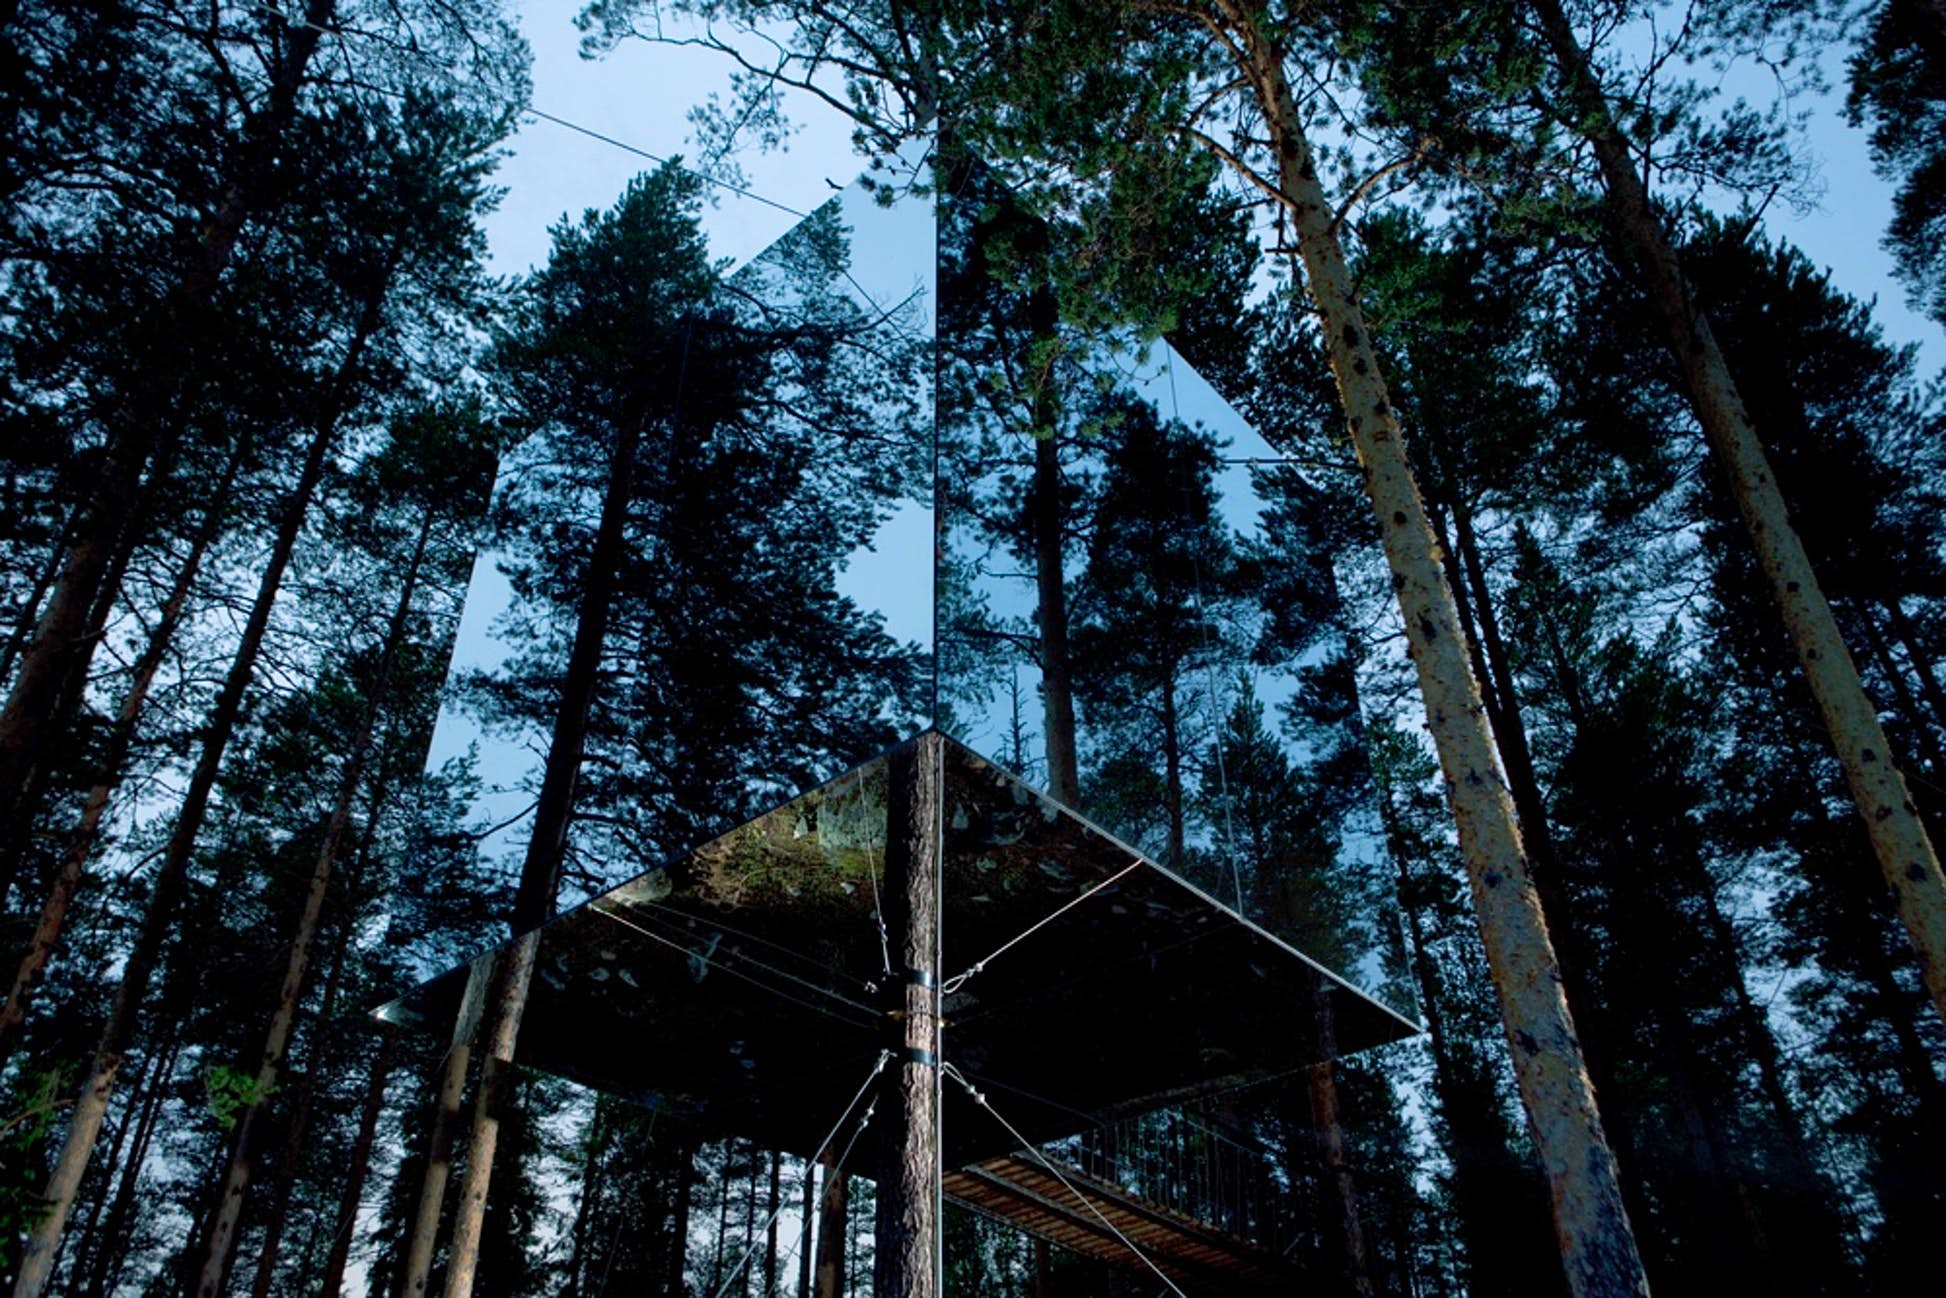 The Mirrorcube at the Treehotel is almost invisible @ Courtesy of Treehotel